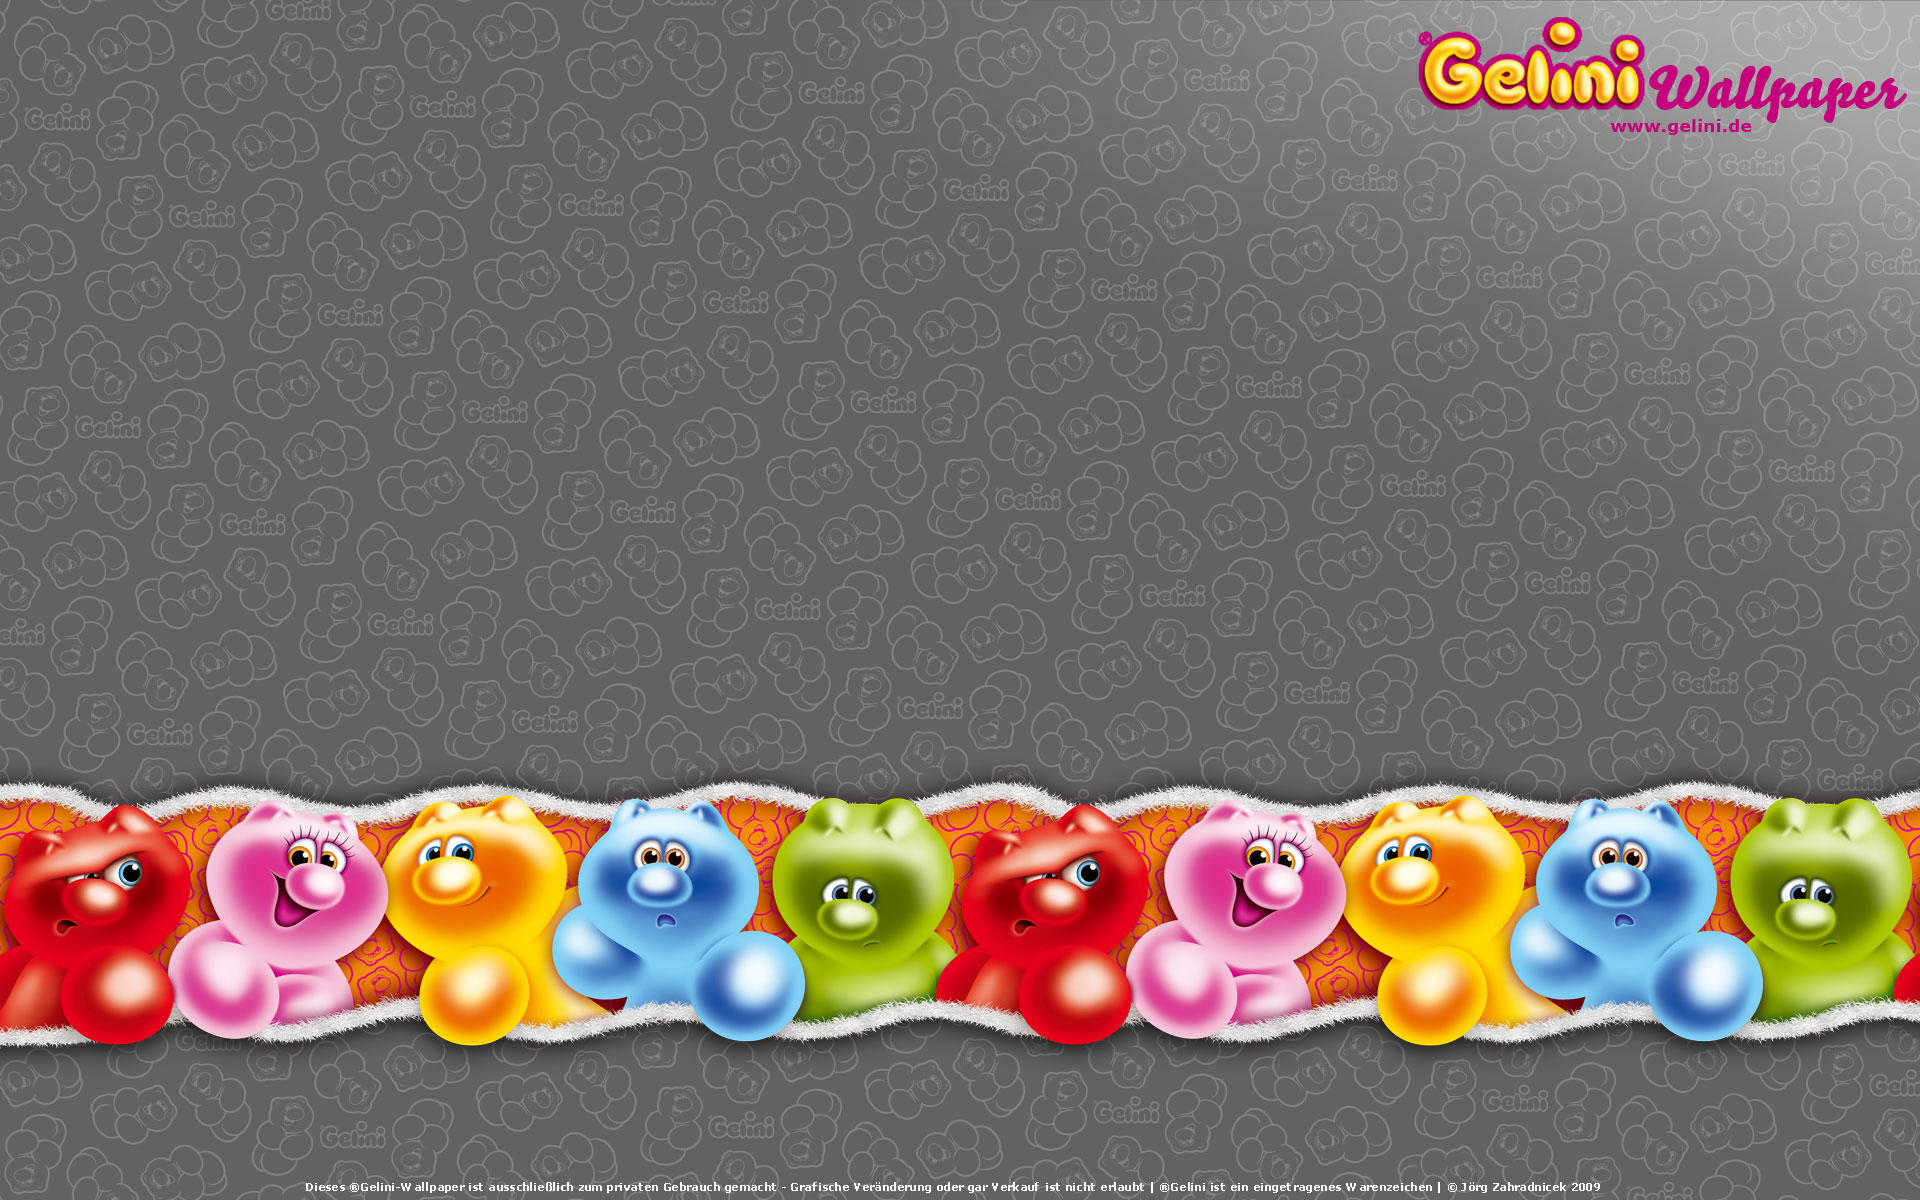 Gelini Wallpaper First5 Px